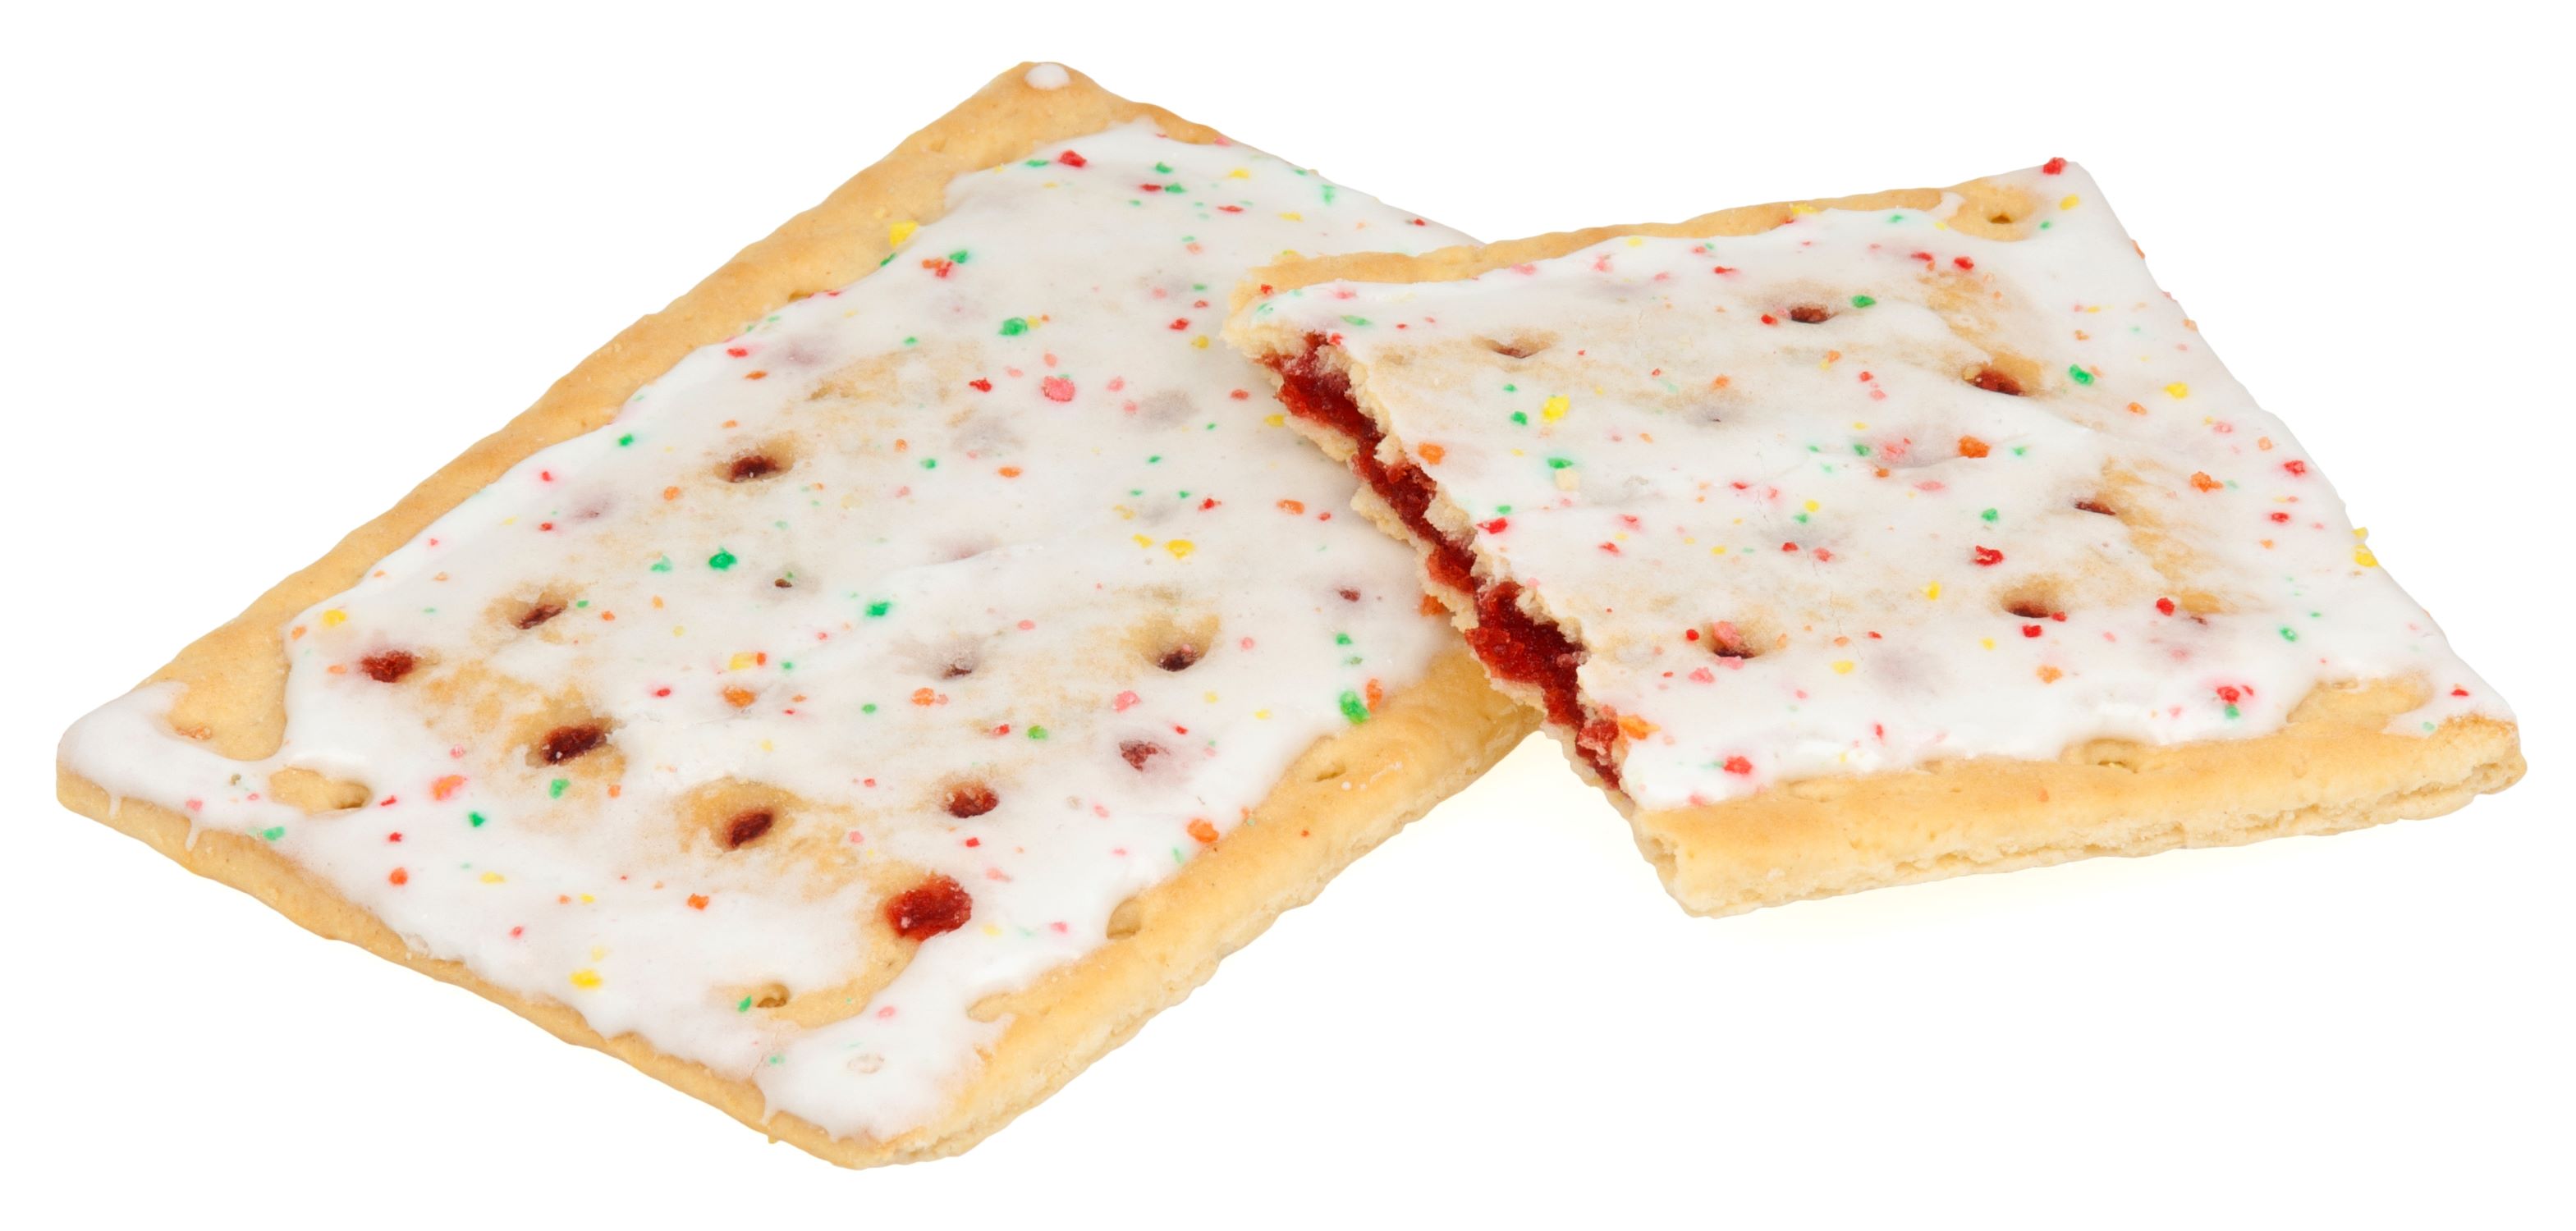 11-poptarts-nutritional-facts